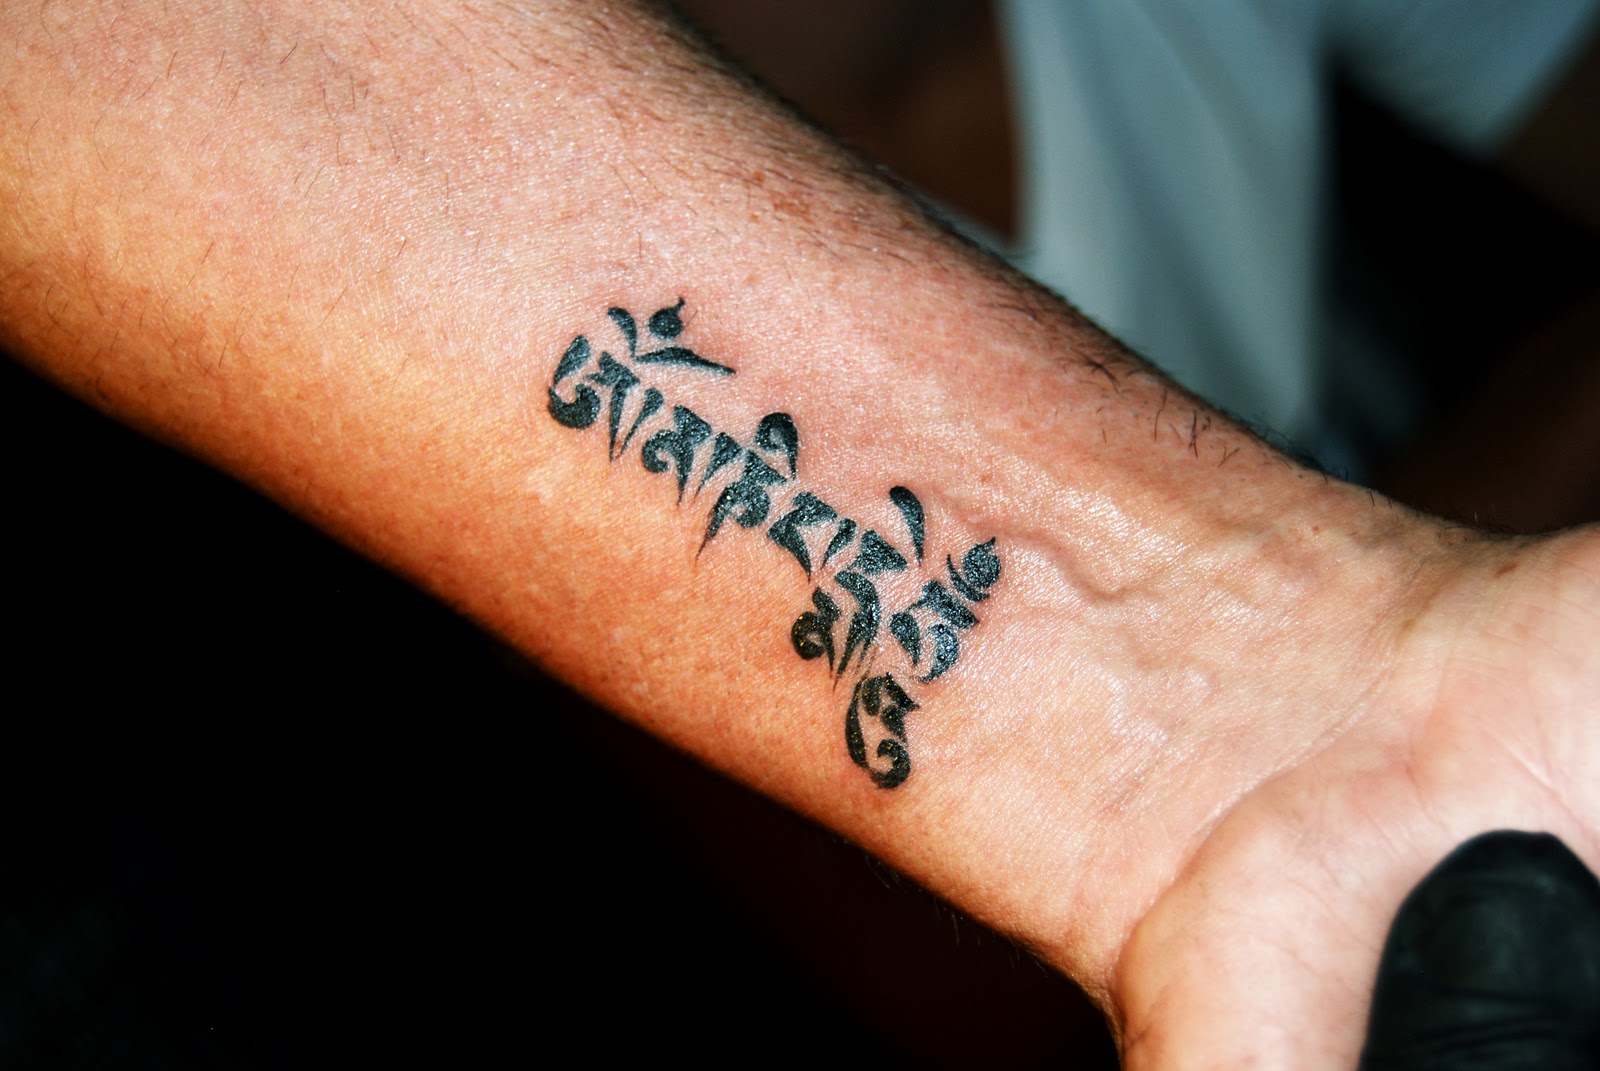 Sanskrit Tattoos Designs, Ideas and Meaning